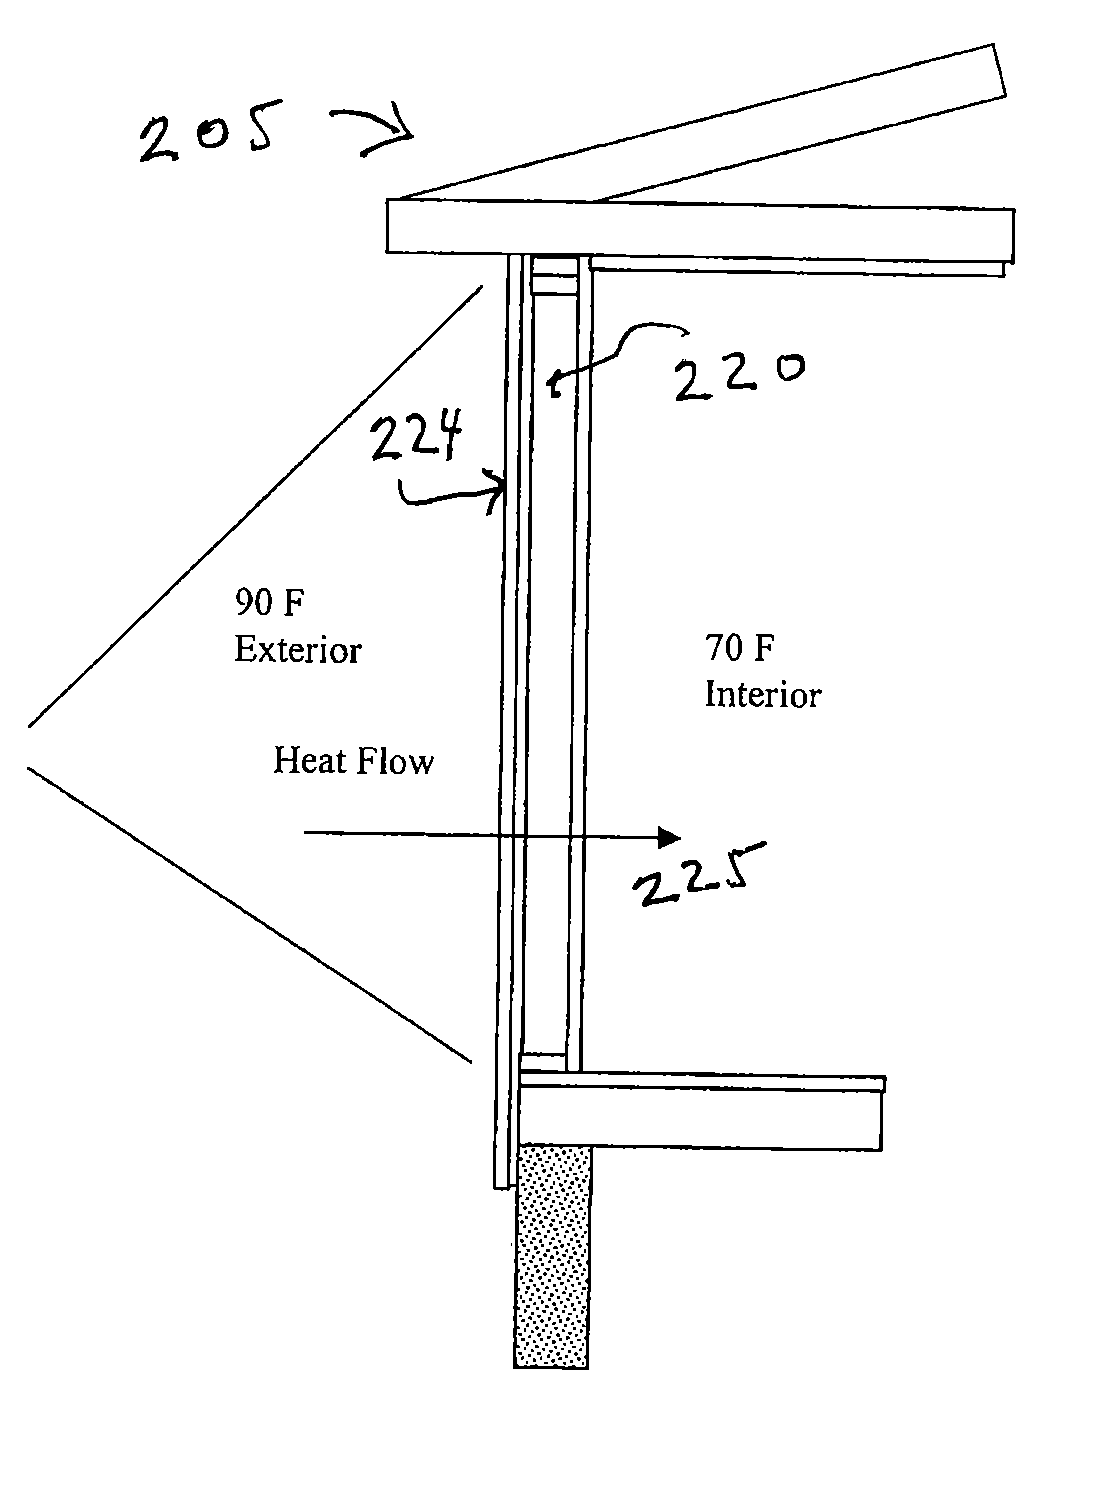 Weatherization imaging systems and methods